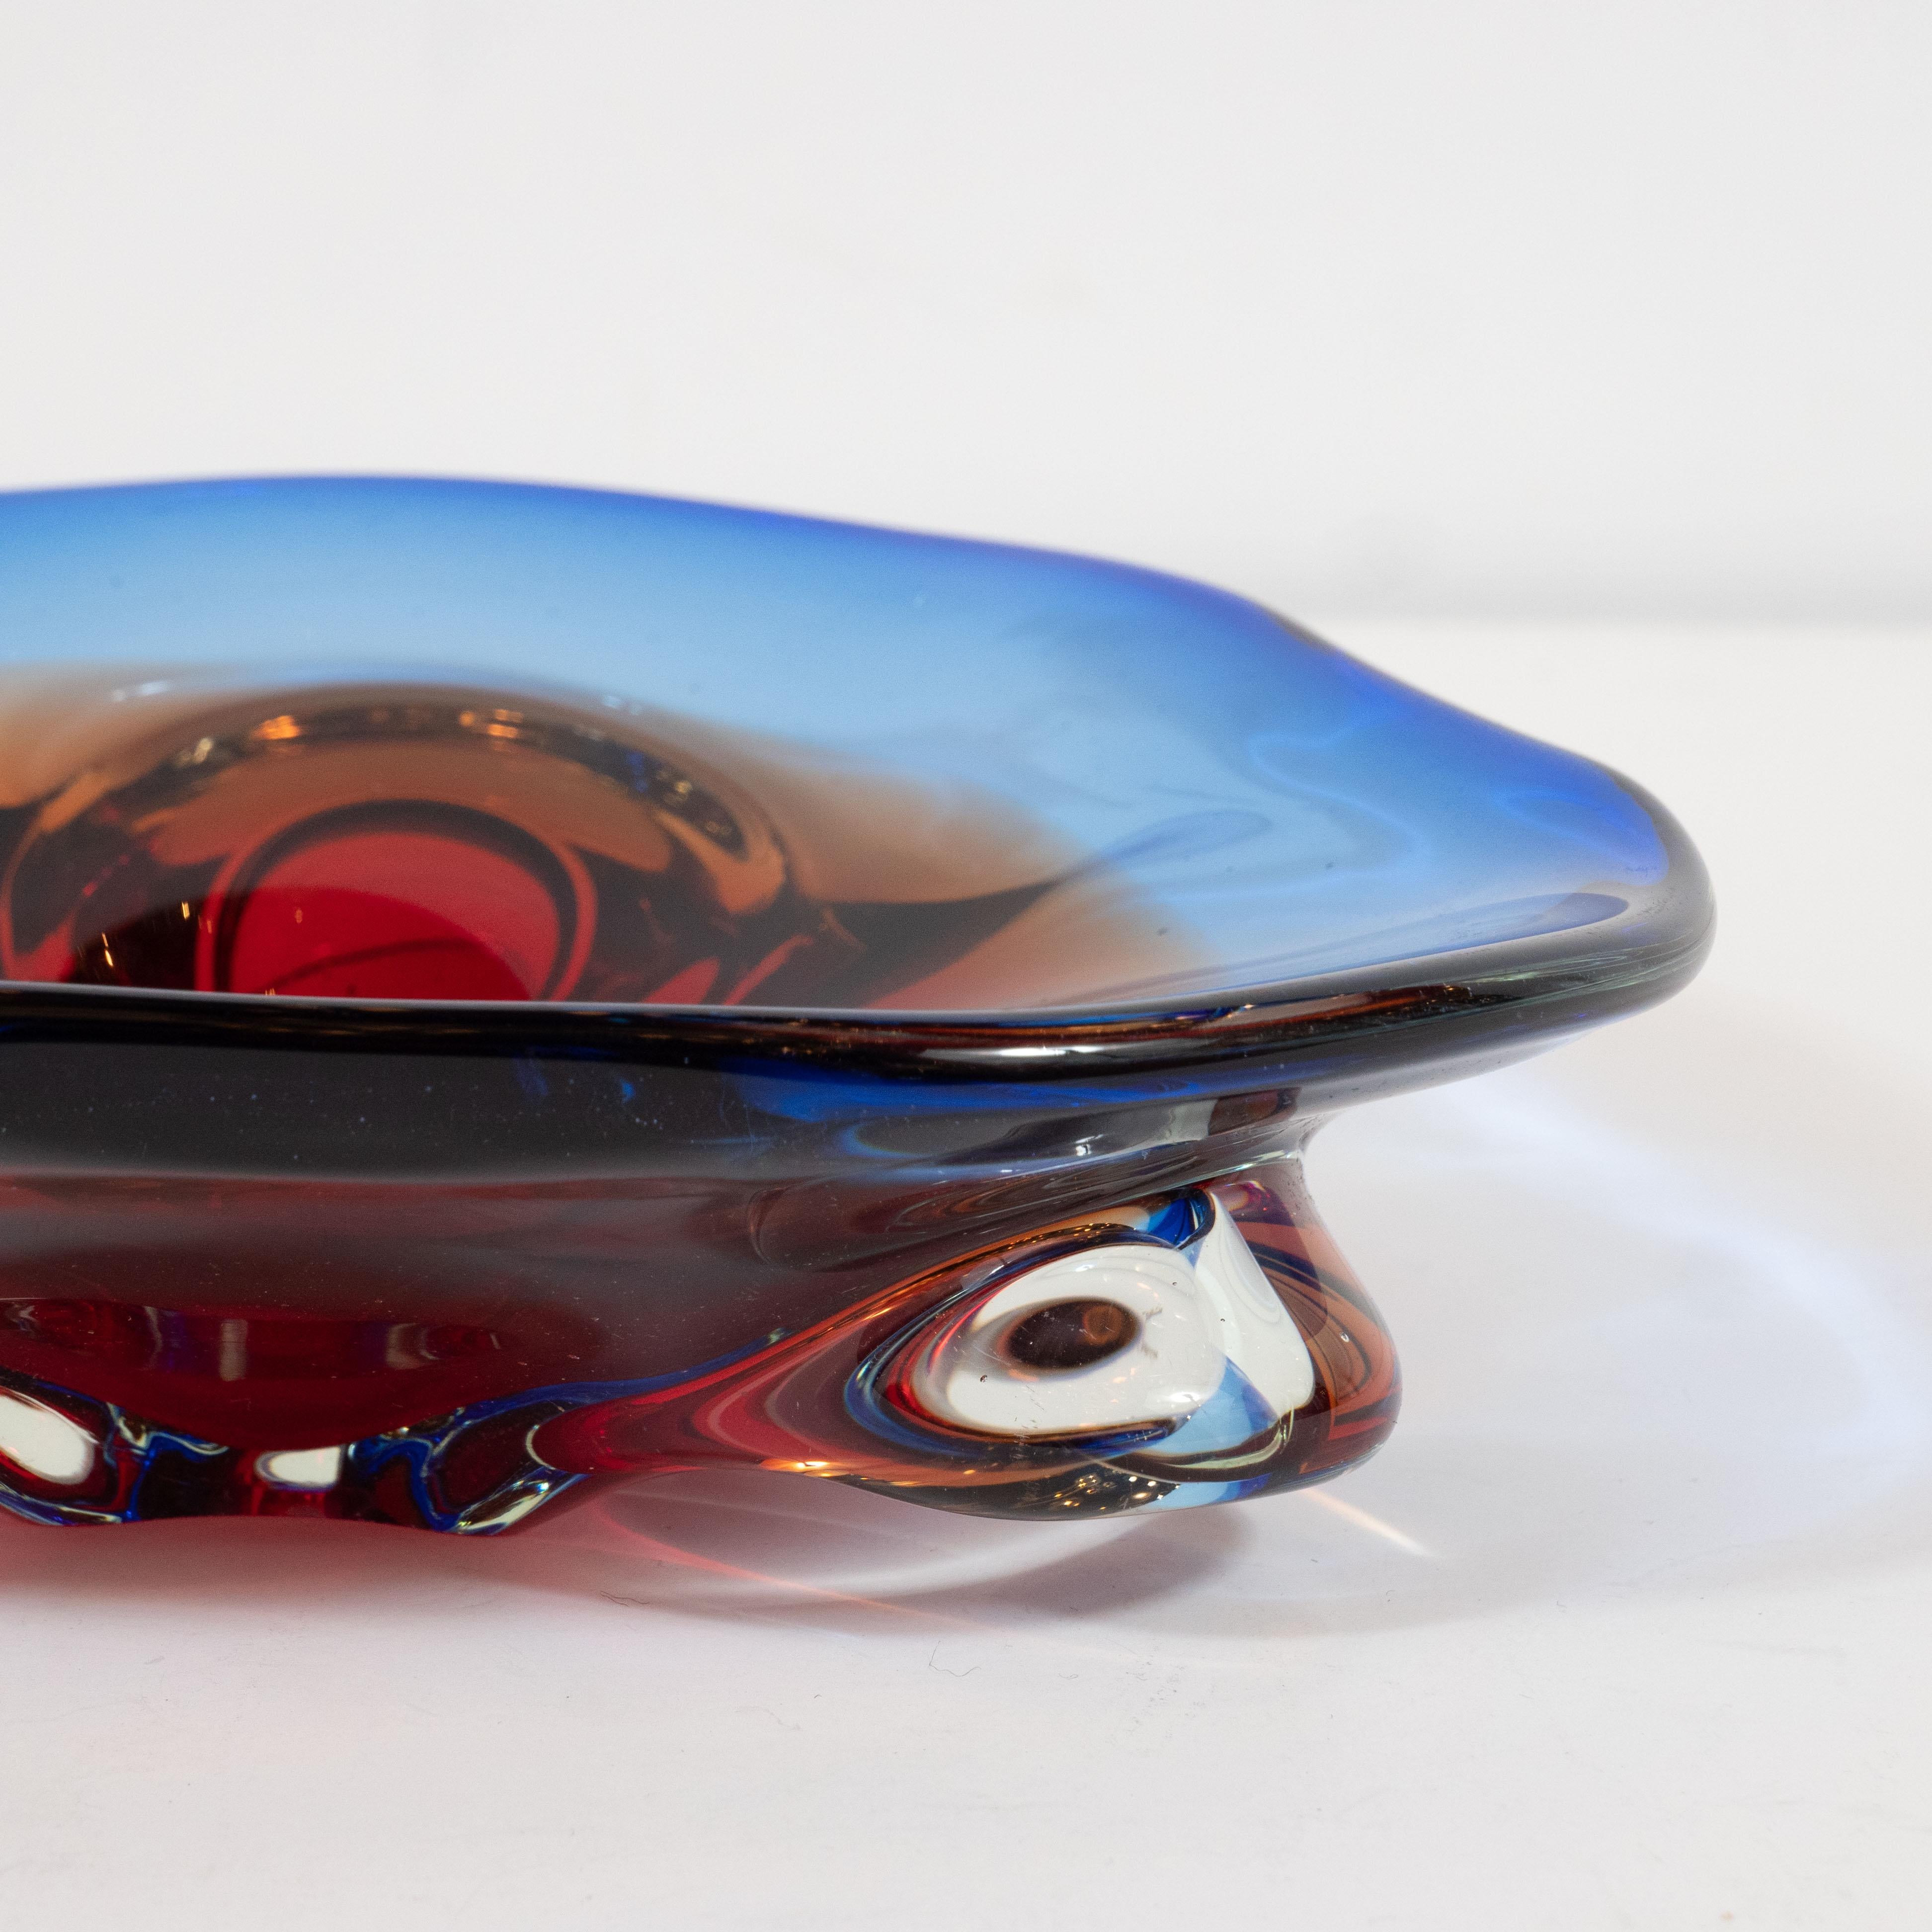 This stunning amorphic decorative bowl / vide poche was realized in Murano, Italy- the island off the coast of Venice renowned for centuries for its superlative glass production- circa 1960. It features an amorphic form with a ruby red interior and